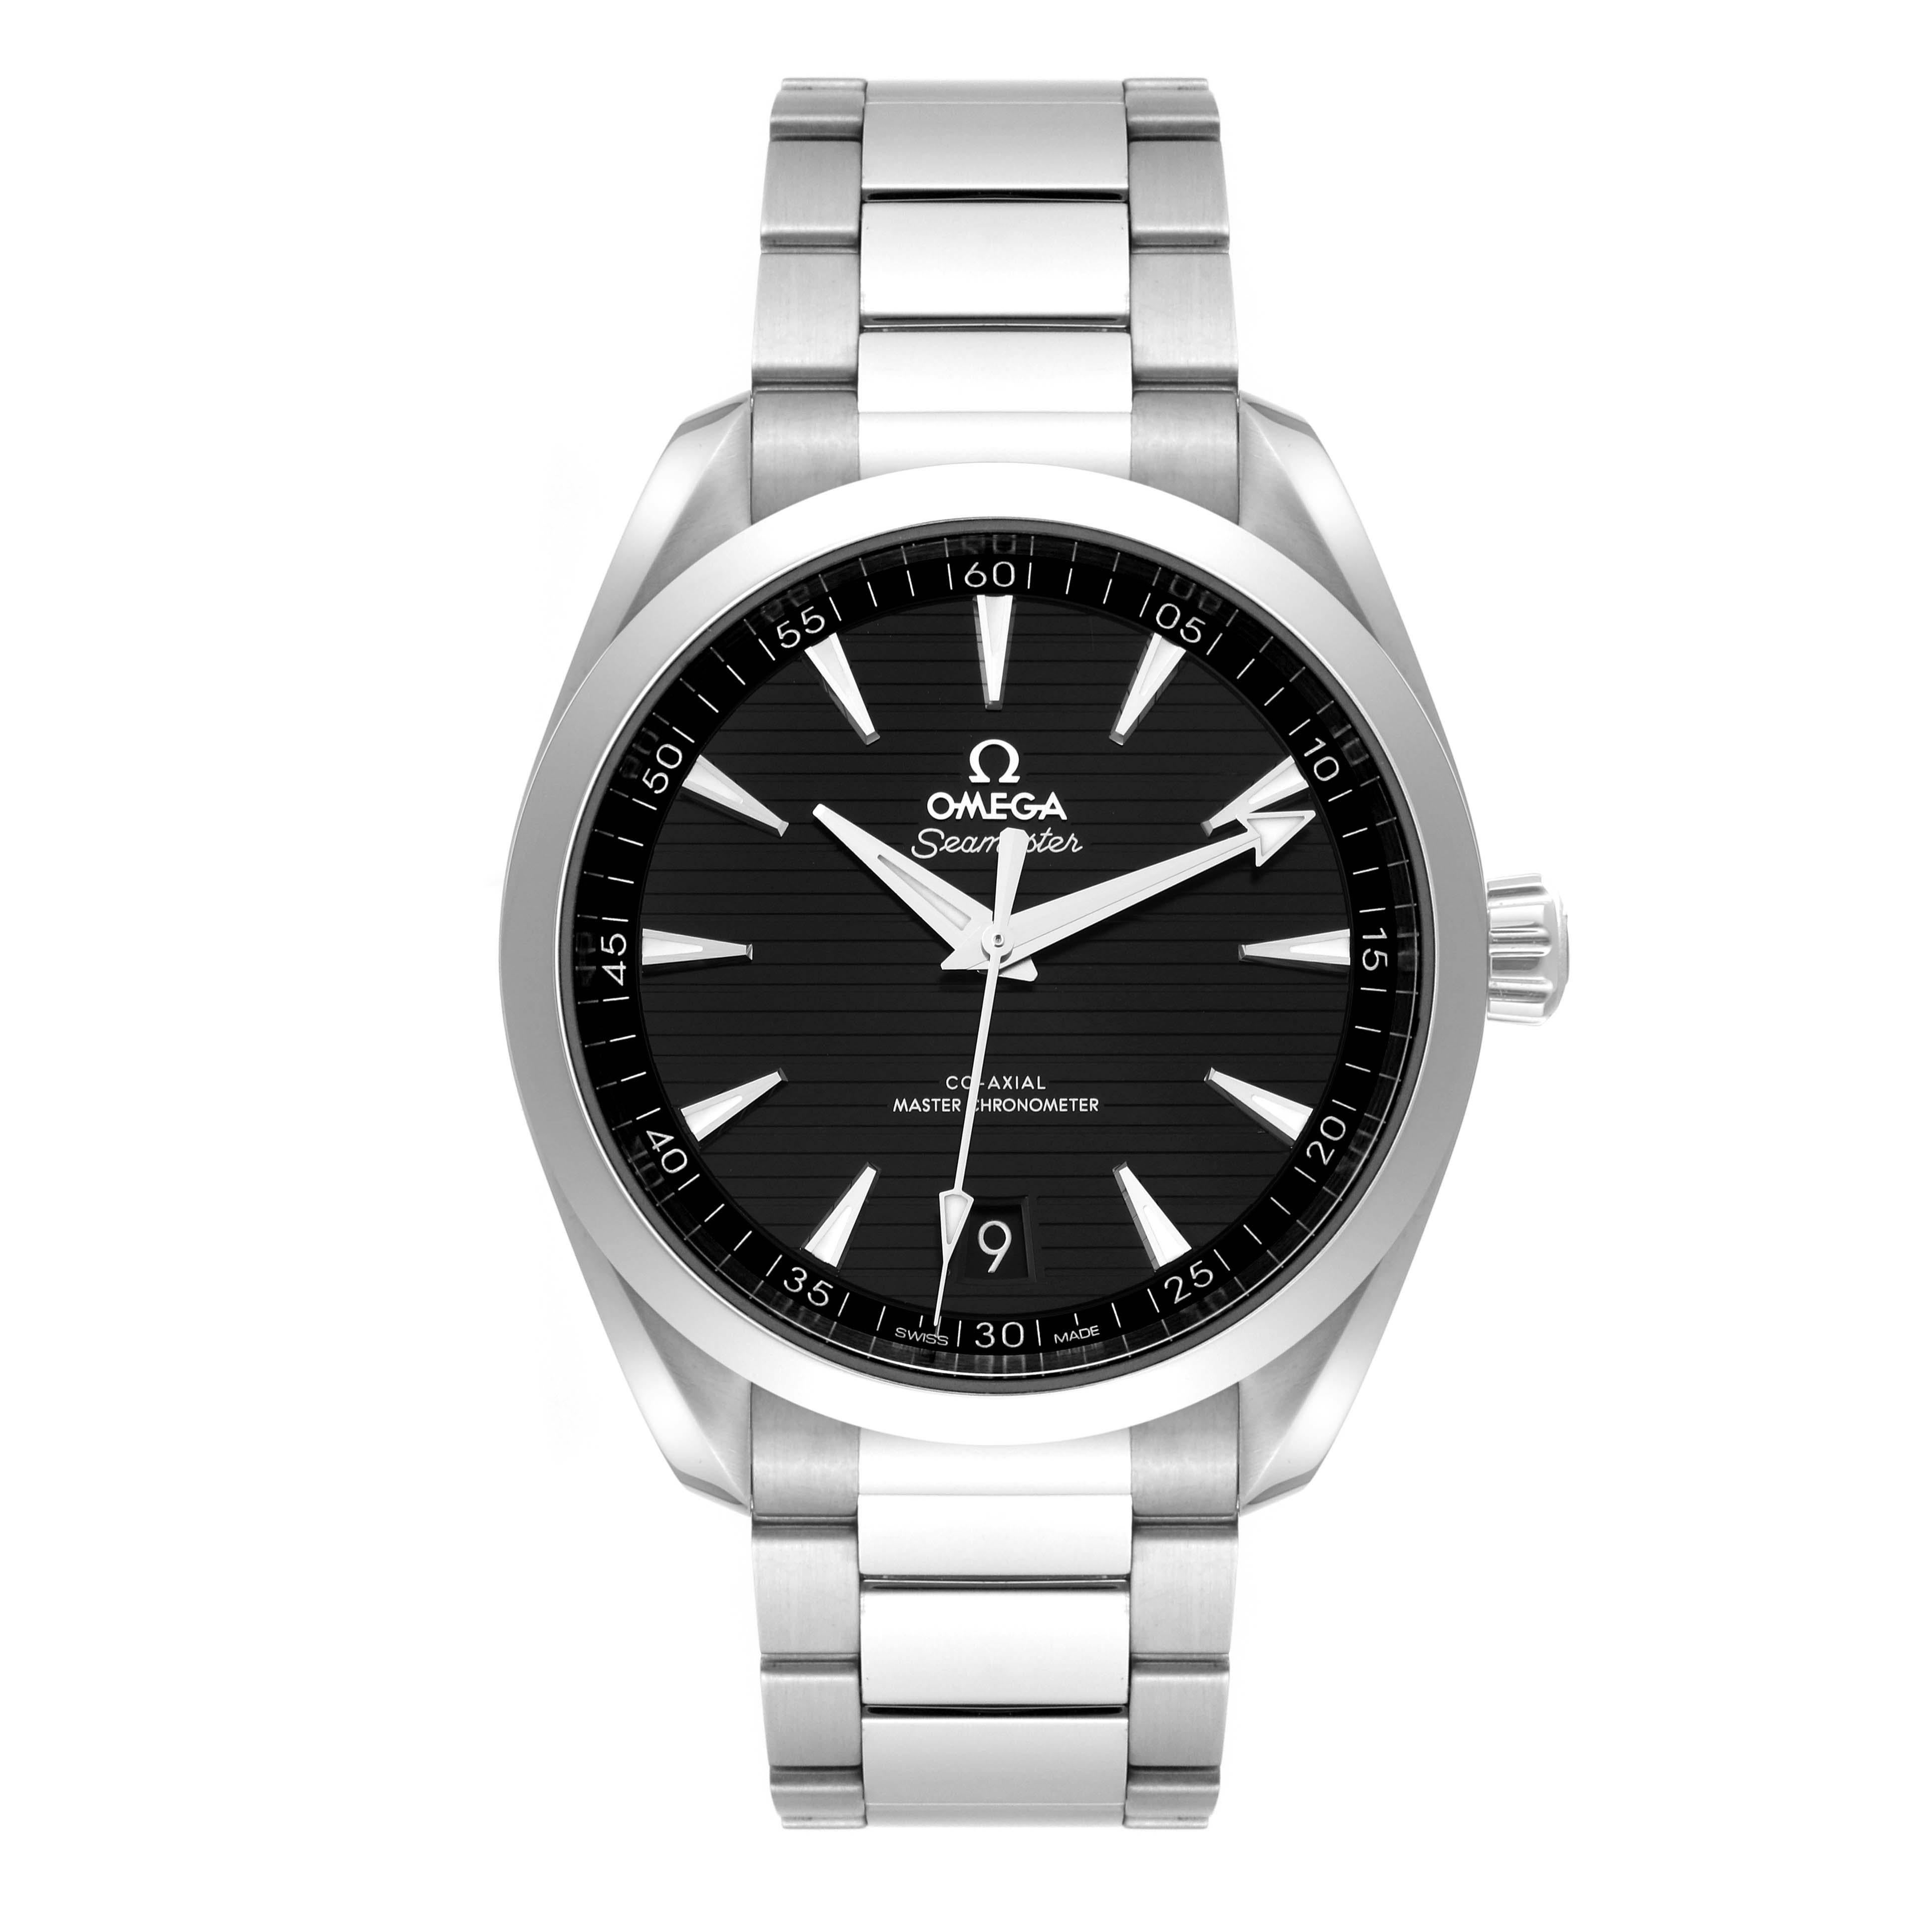 Omega Seamaster Aqua Terra Steel Mens Watch 220.10.41.21.01.001 Box Card. Automatic self-winding movement. Stainless steel round case 41.0 mm in diameter. Case thickness 13.2 mm. Transparent exhibition sapphire crystal caseback. Stainless steel